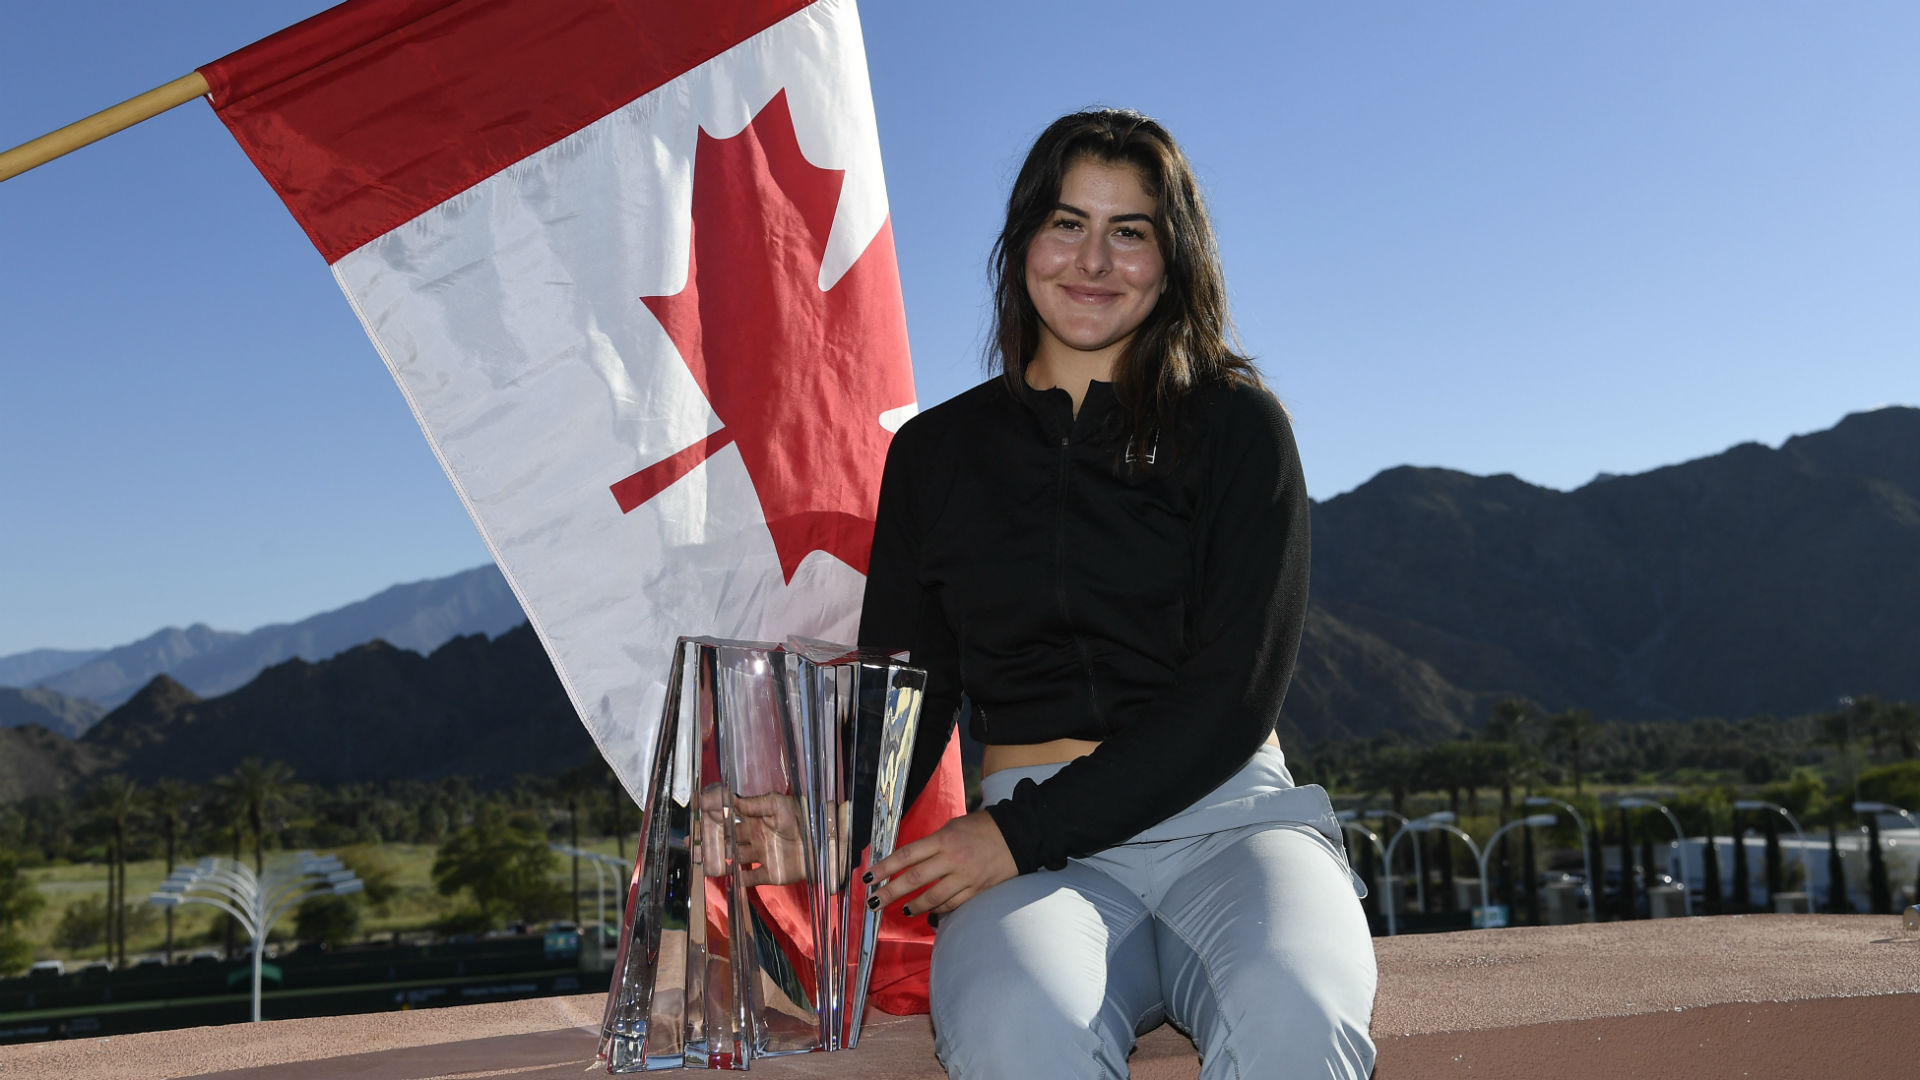 Tennis Canada Coach Says Sky Is The Limit For Bianca Andreescu